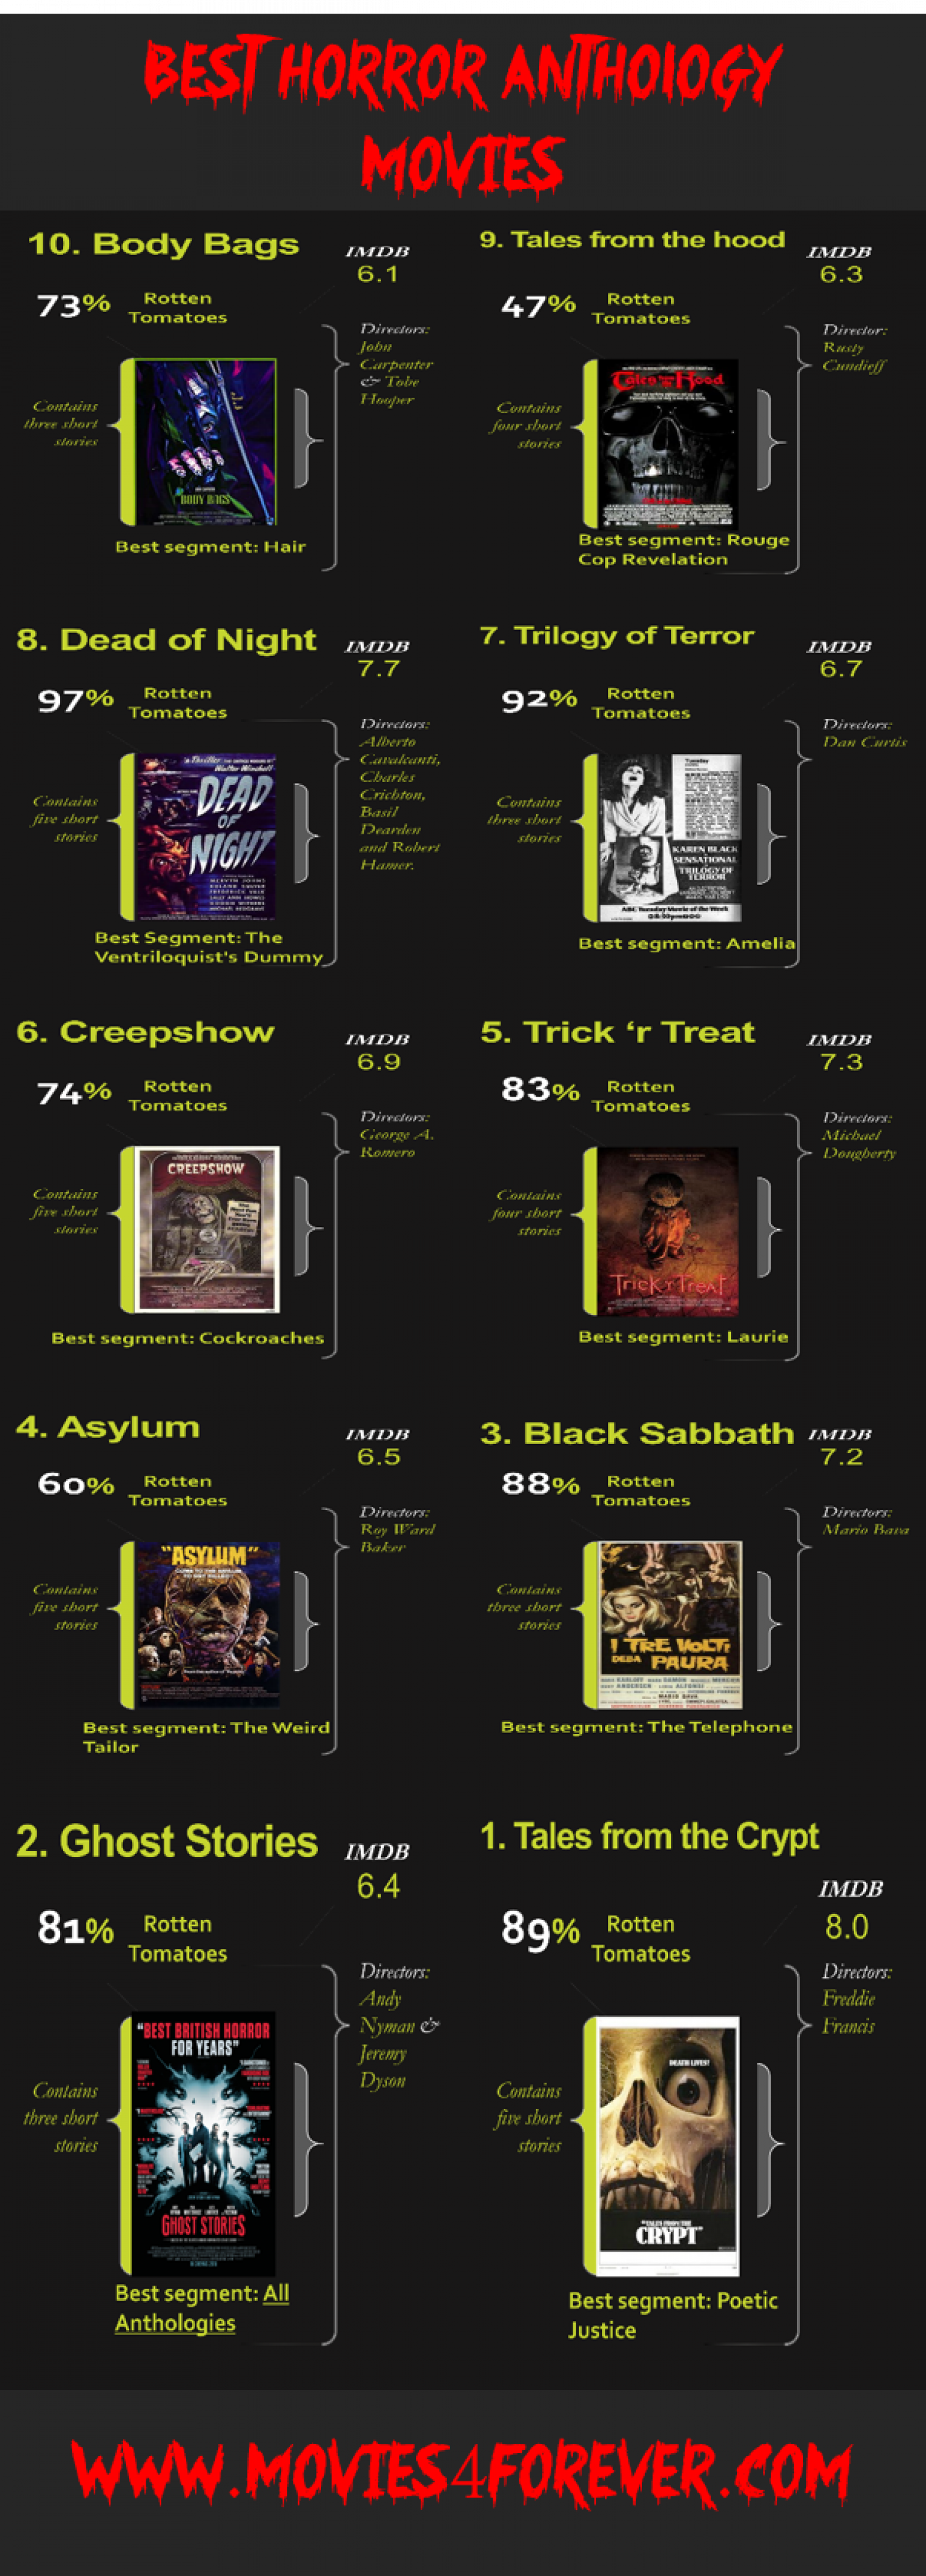 10 best Horror Anthology Movies Infographic